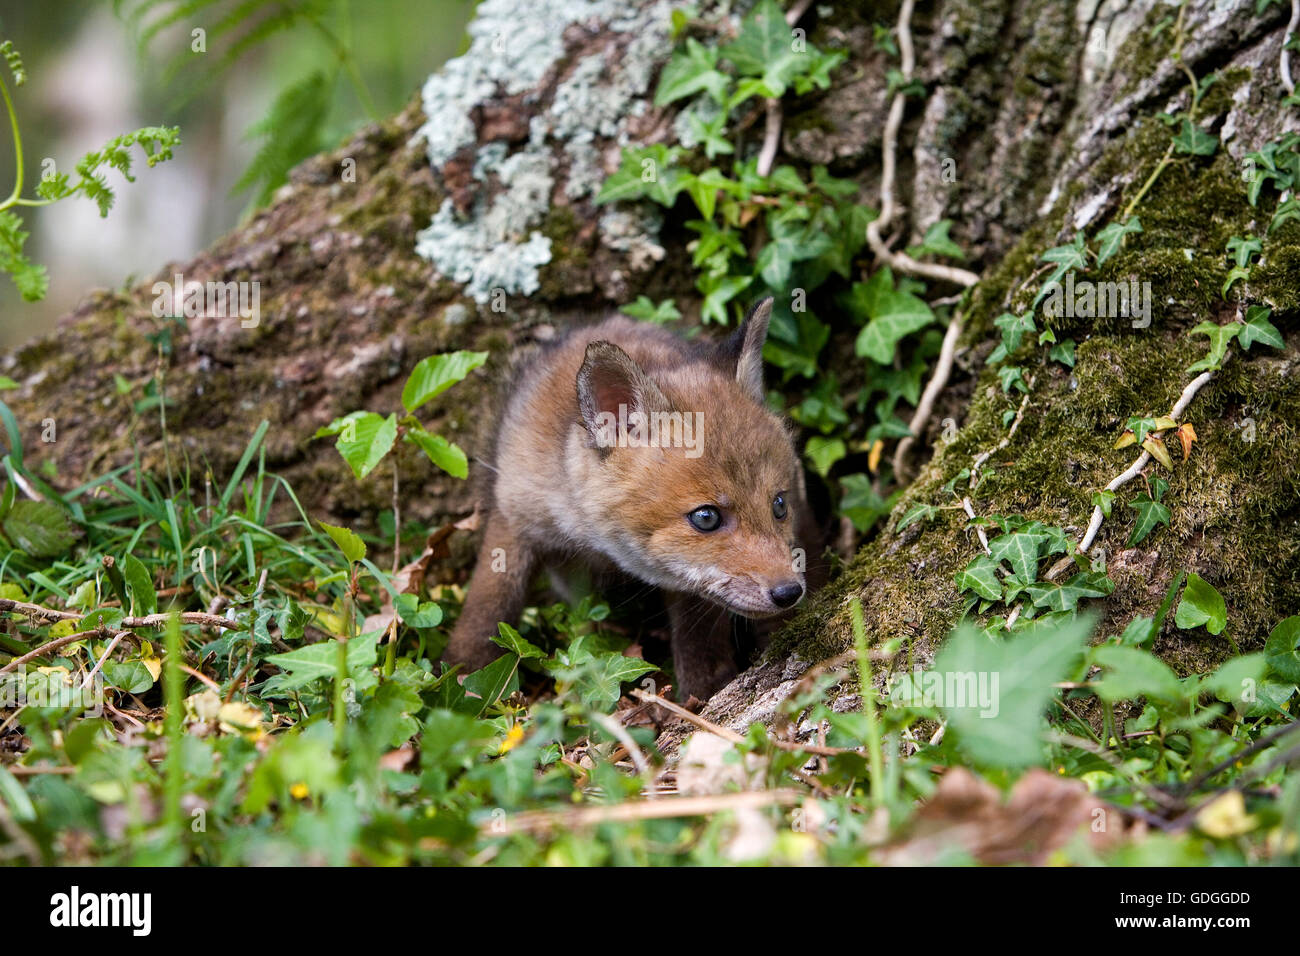 RED FOX vulpes vulpes IN NORMANDY Stock Photo